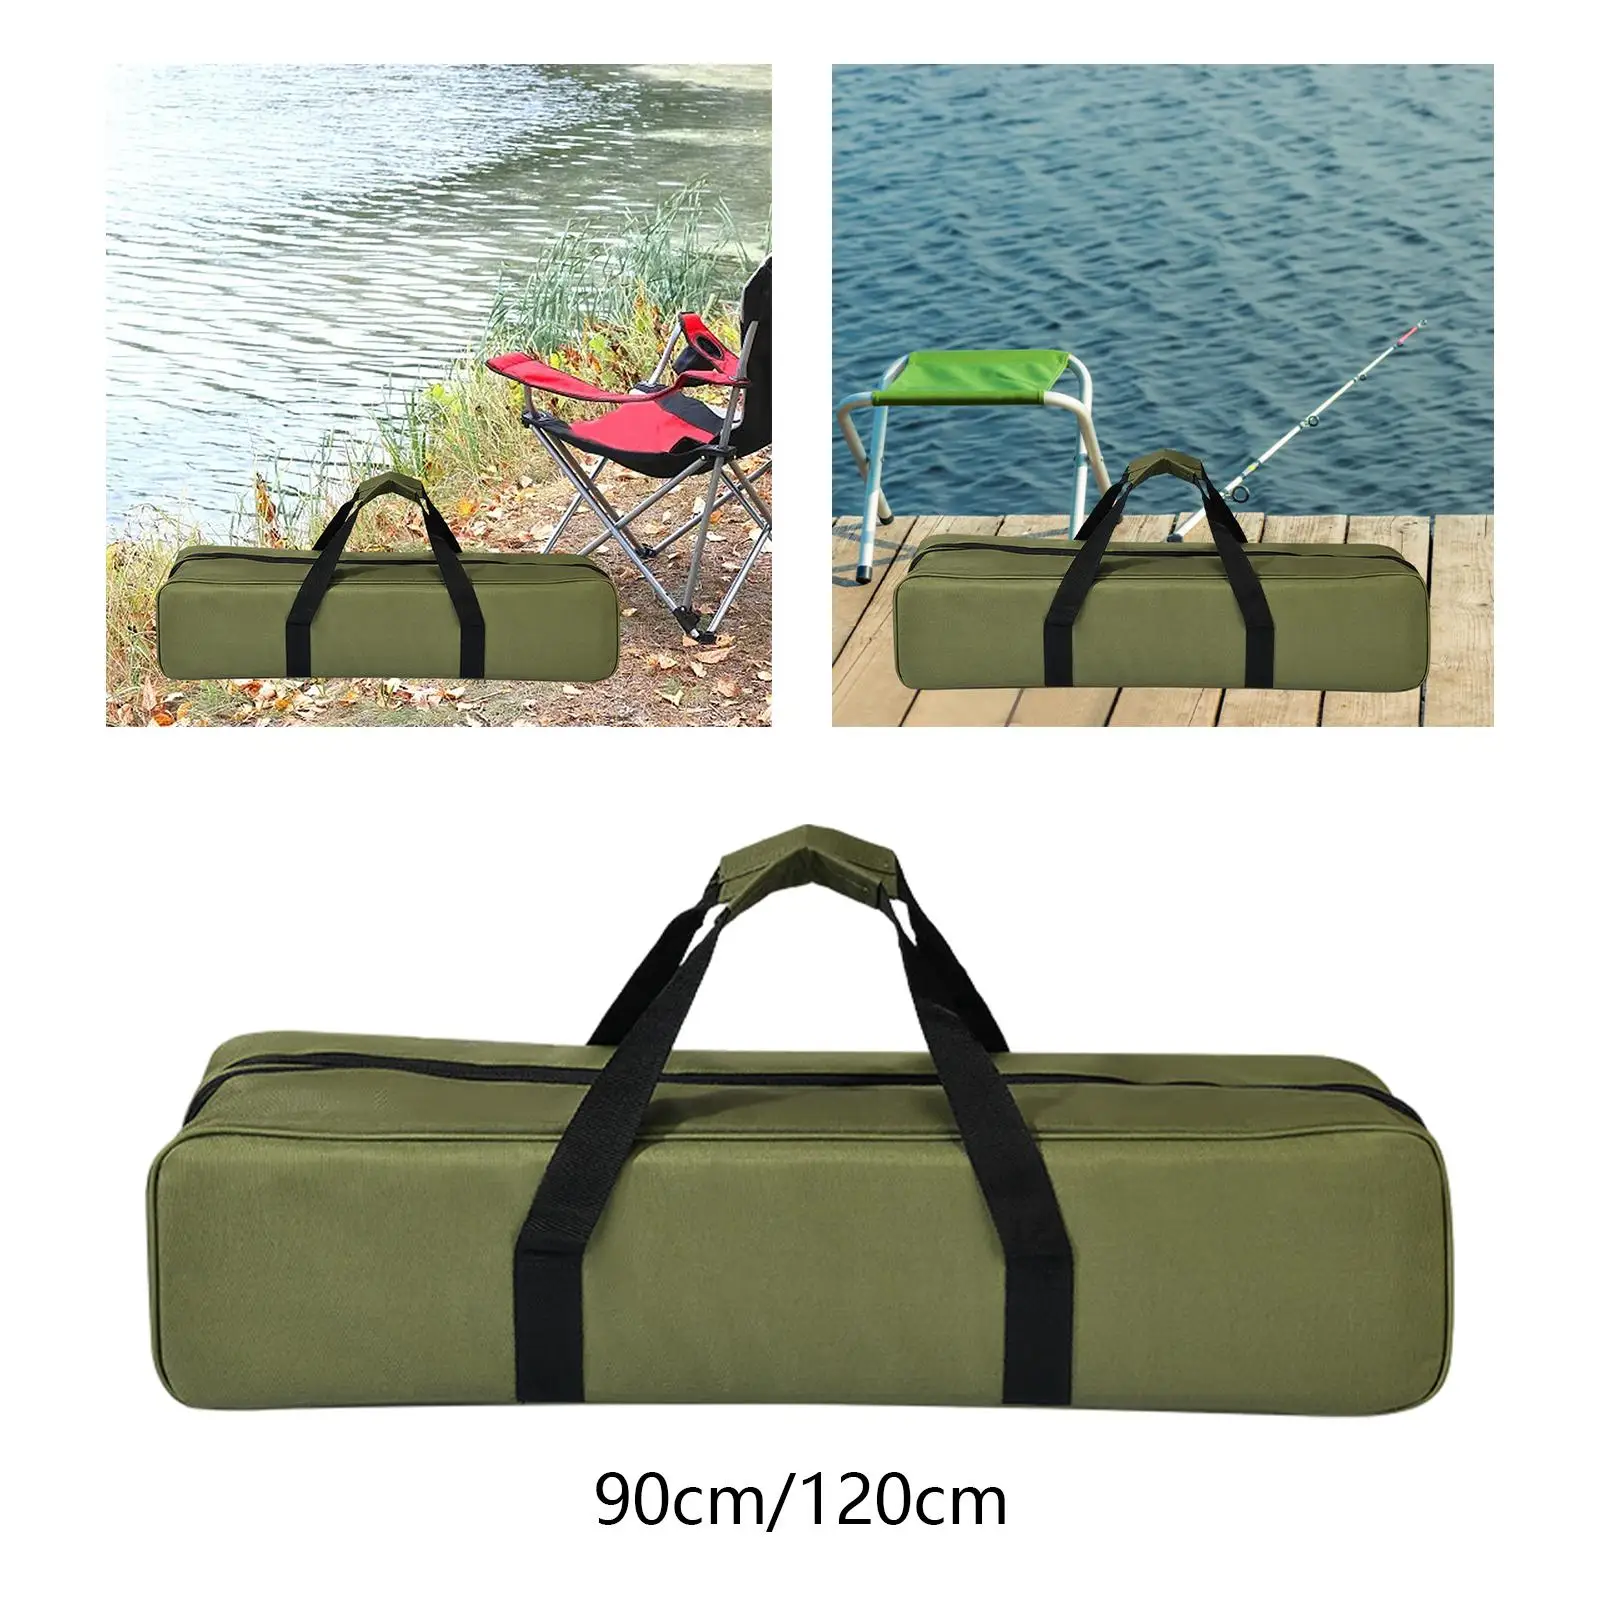 Camping Storage Bag Waterproof Tent Pole Bag for Travel Light Stands Fishing